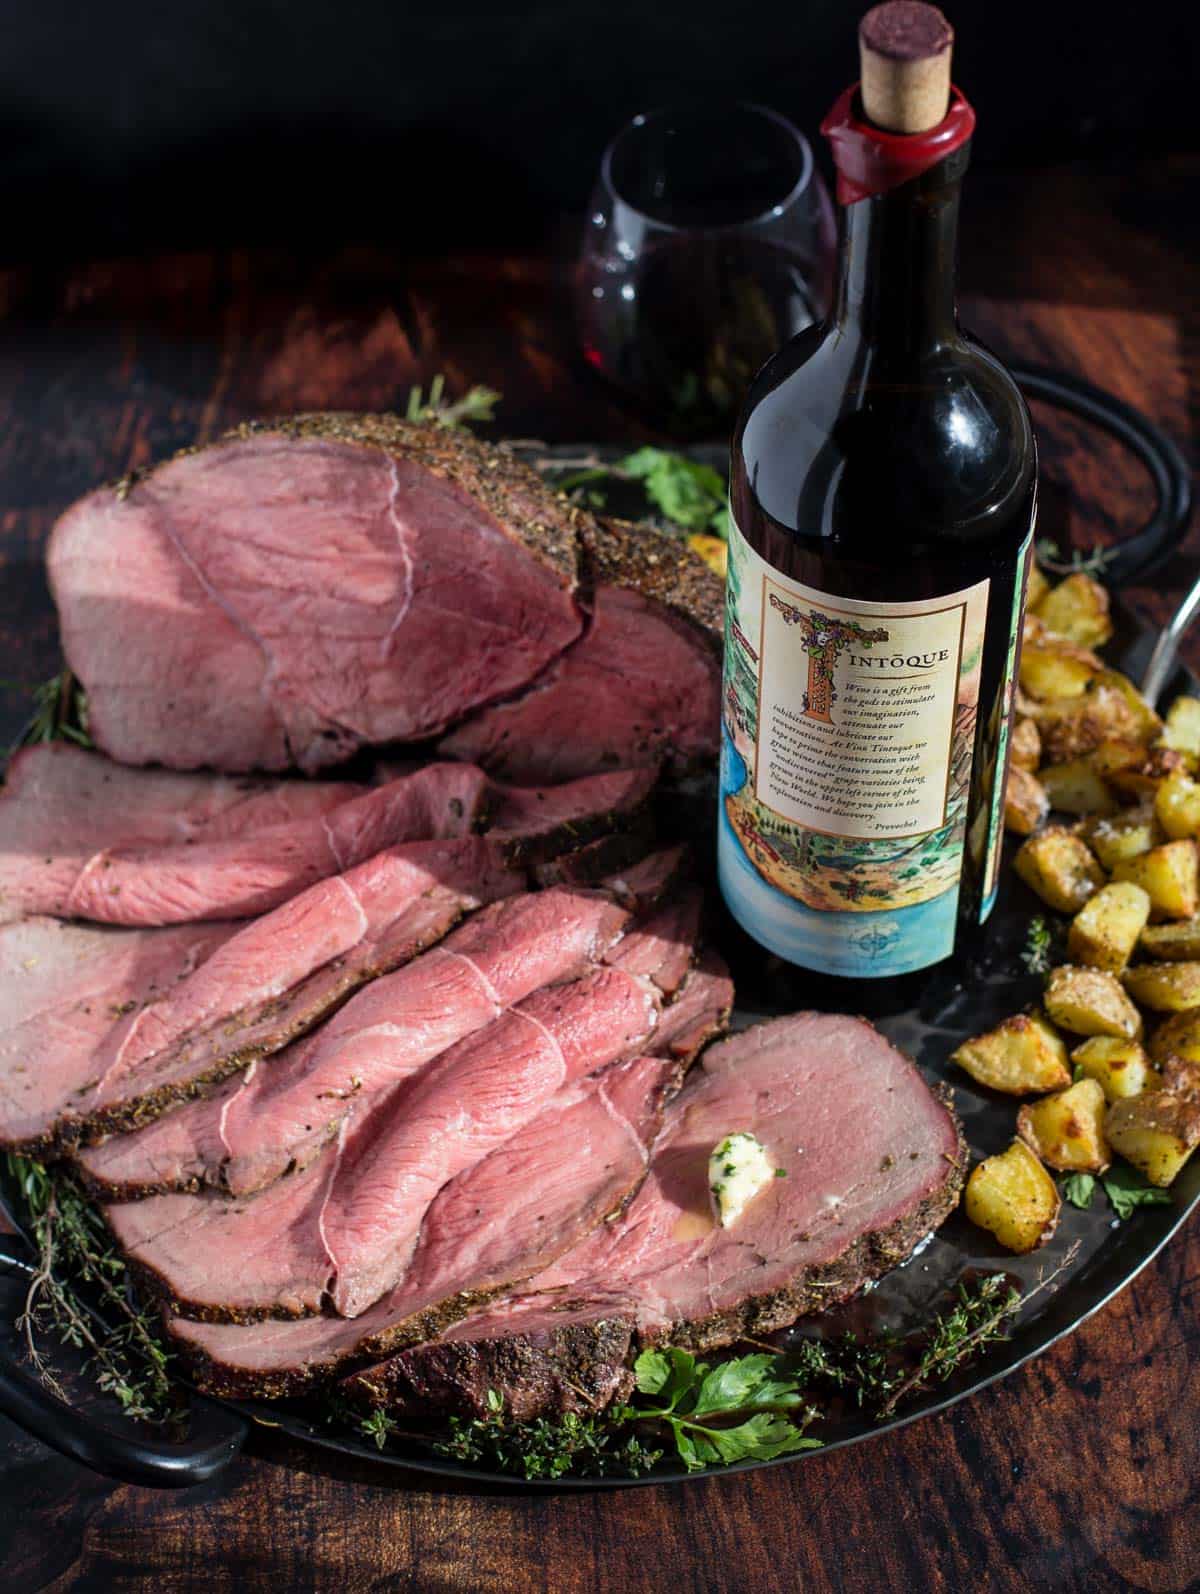 Smoked Roast Beef with roasted potatoes and Carménère wine pairing.